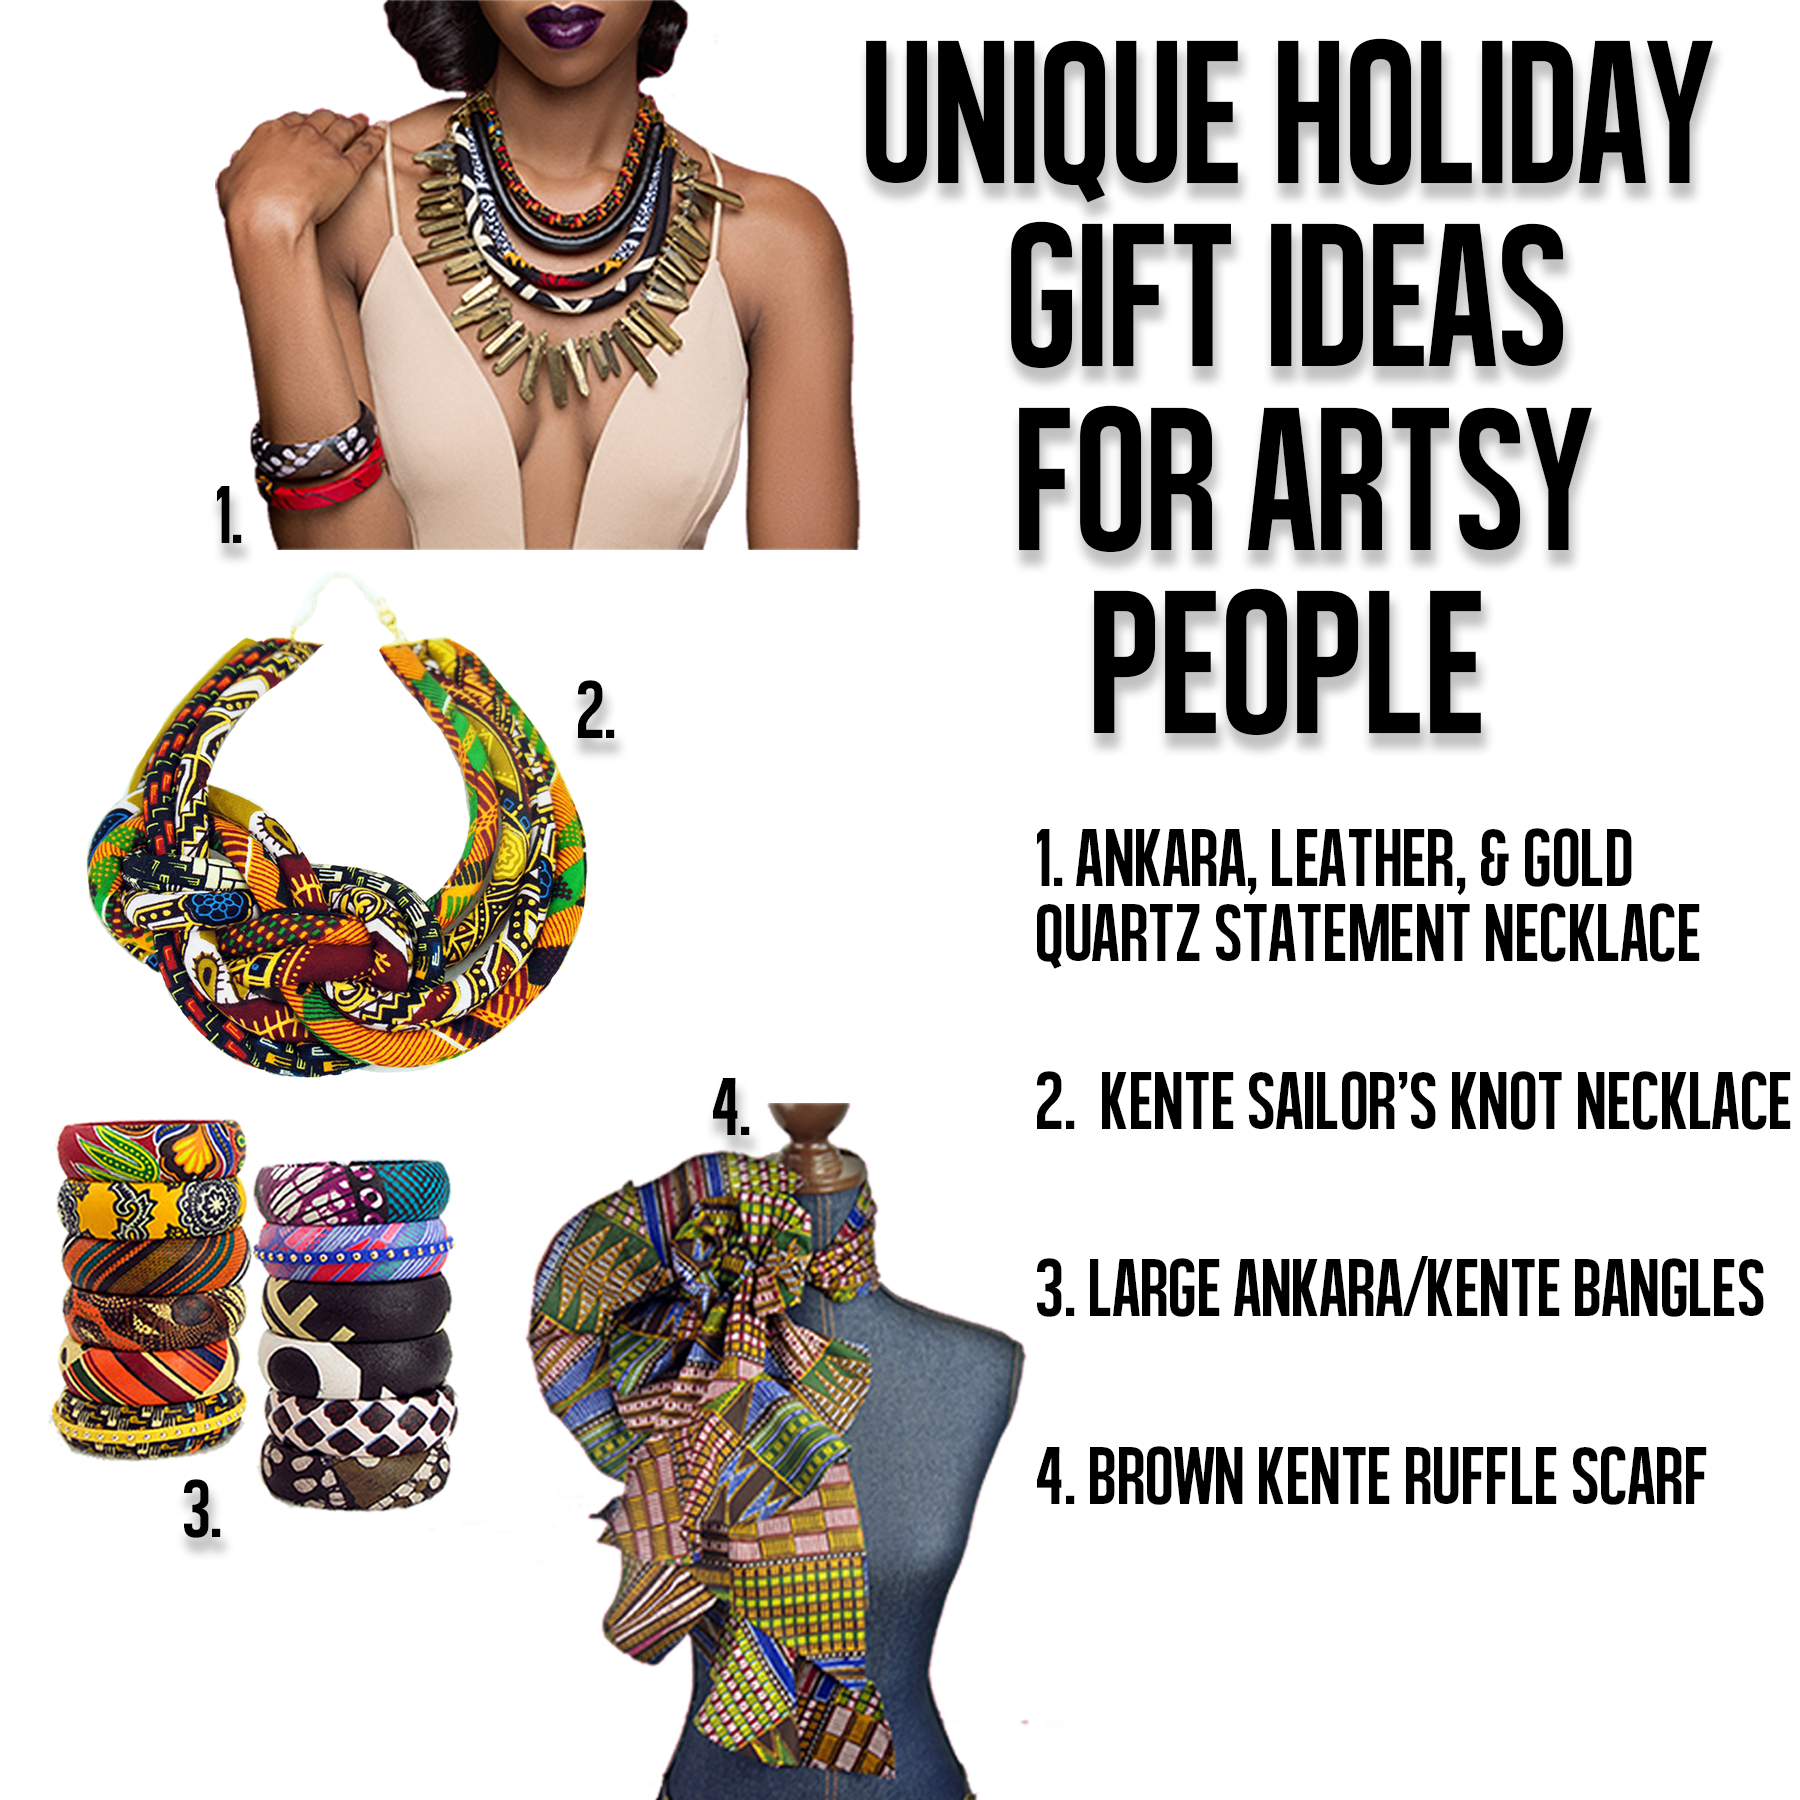 Unique Holiday Gift Ideas for Artsy People